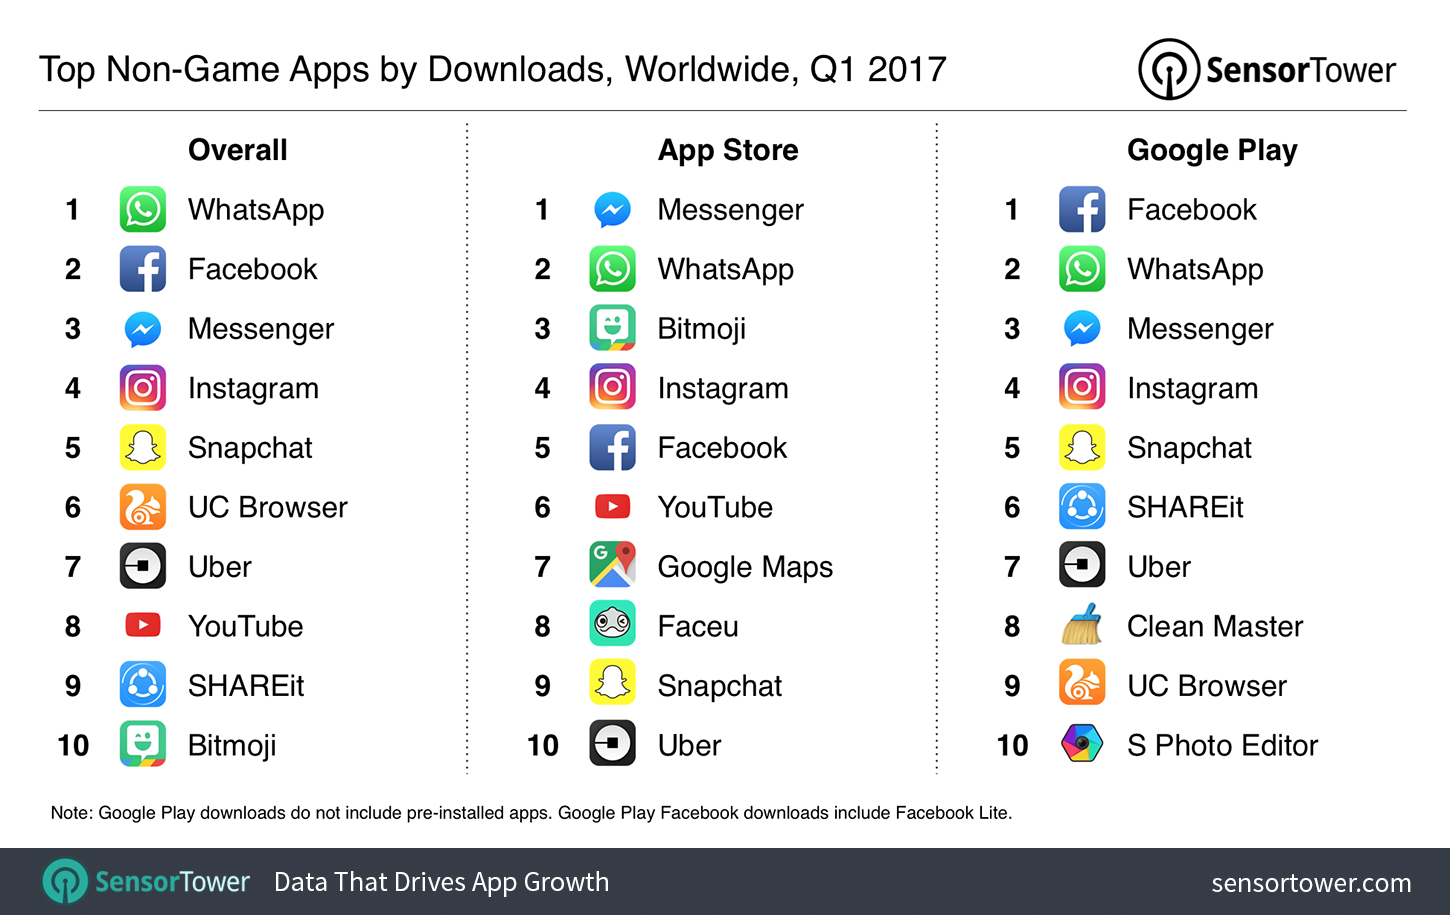 Q1 2017's Top Mobile Apps by Worldwide Downloads